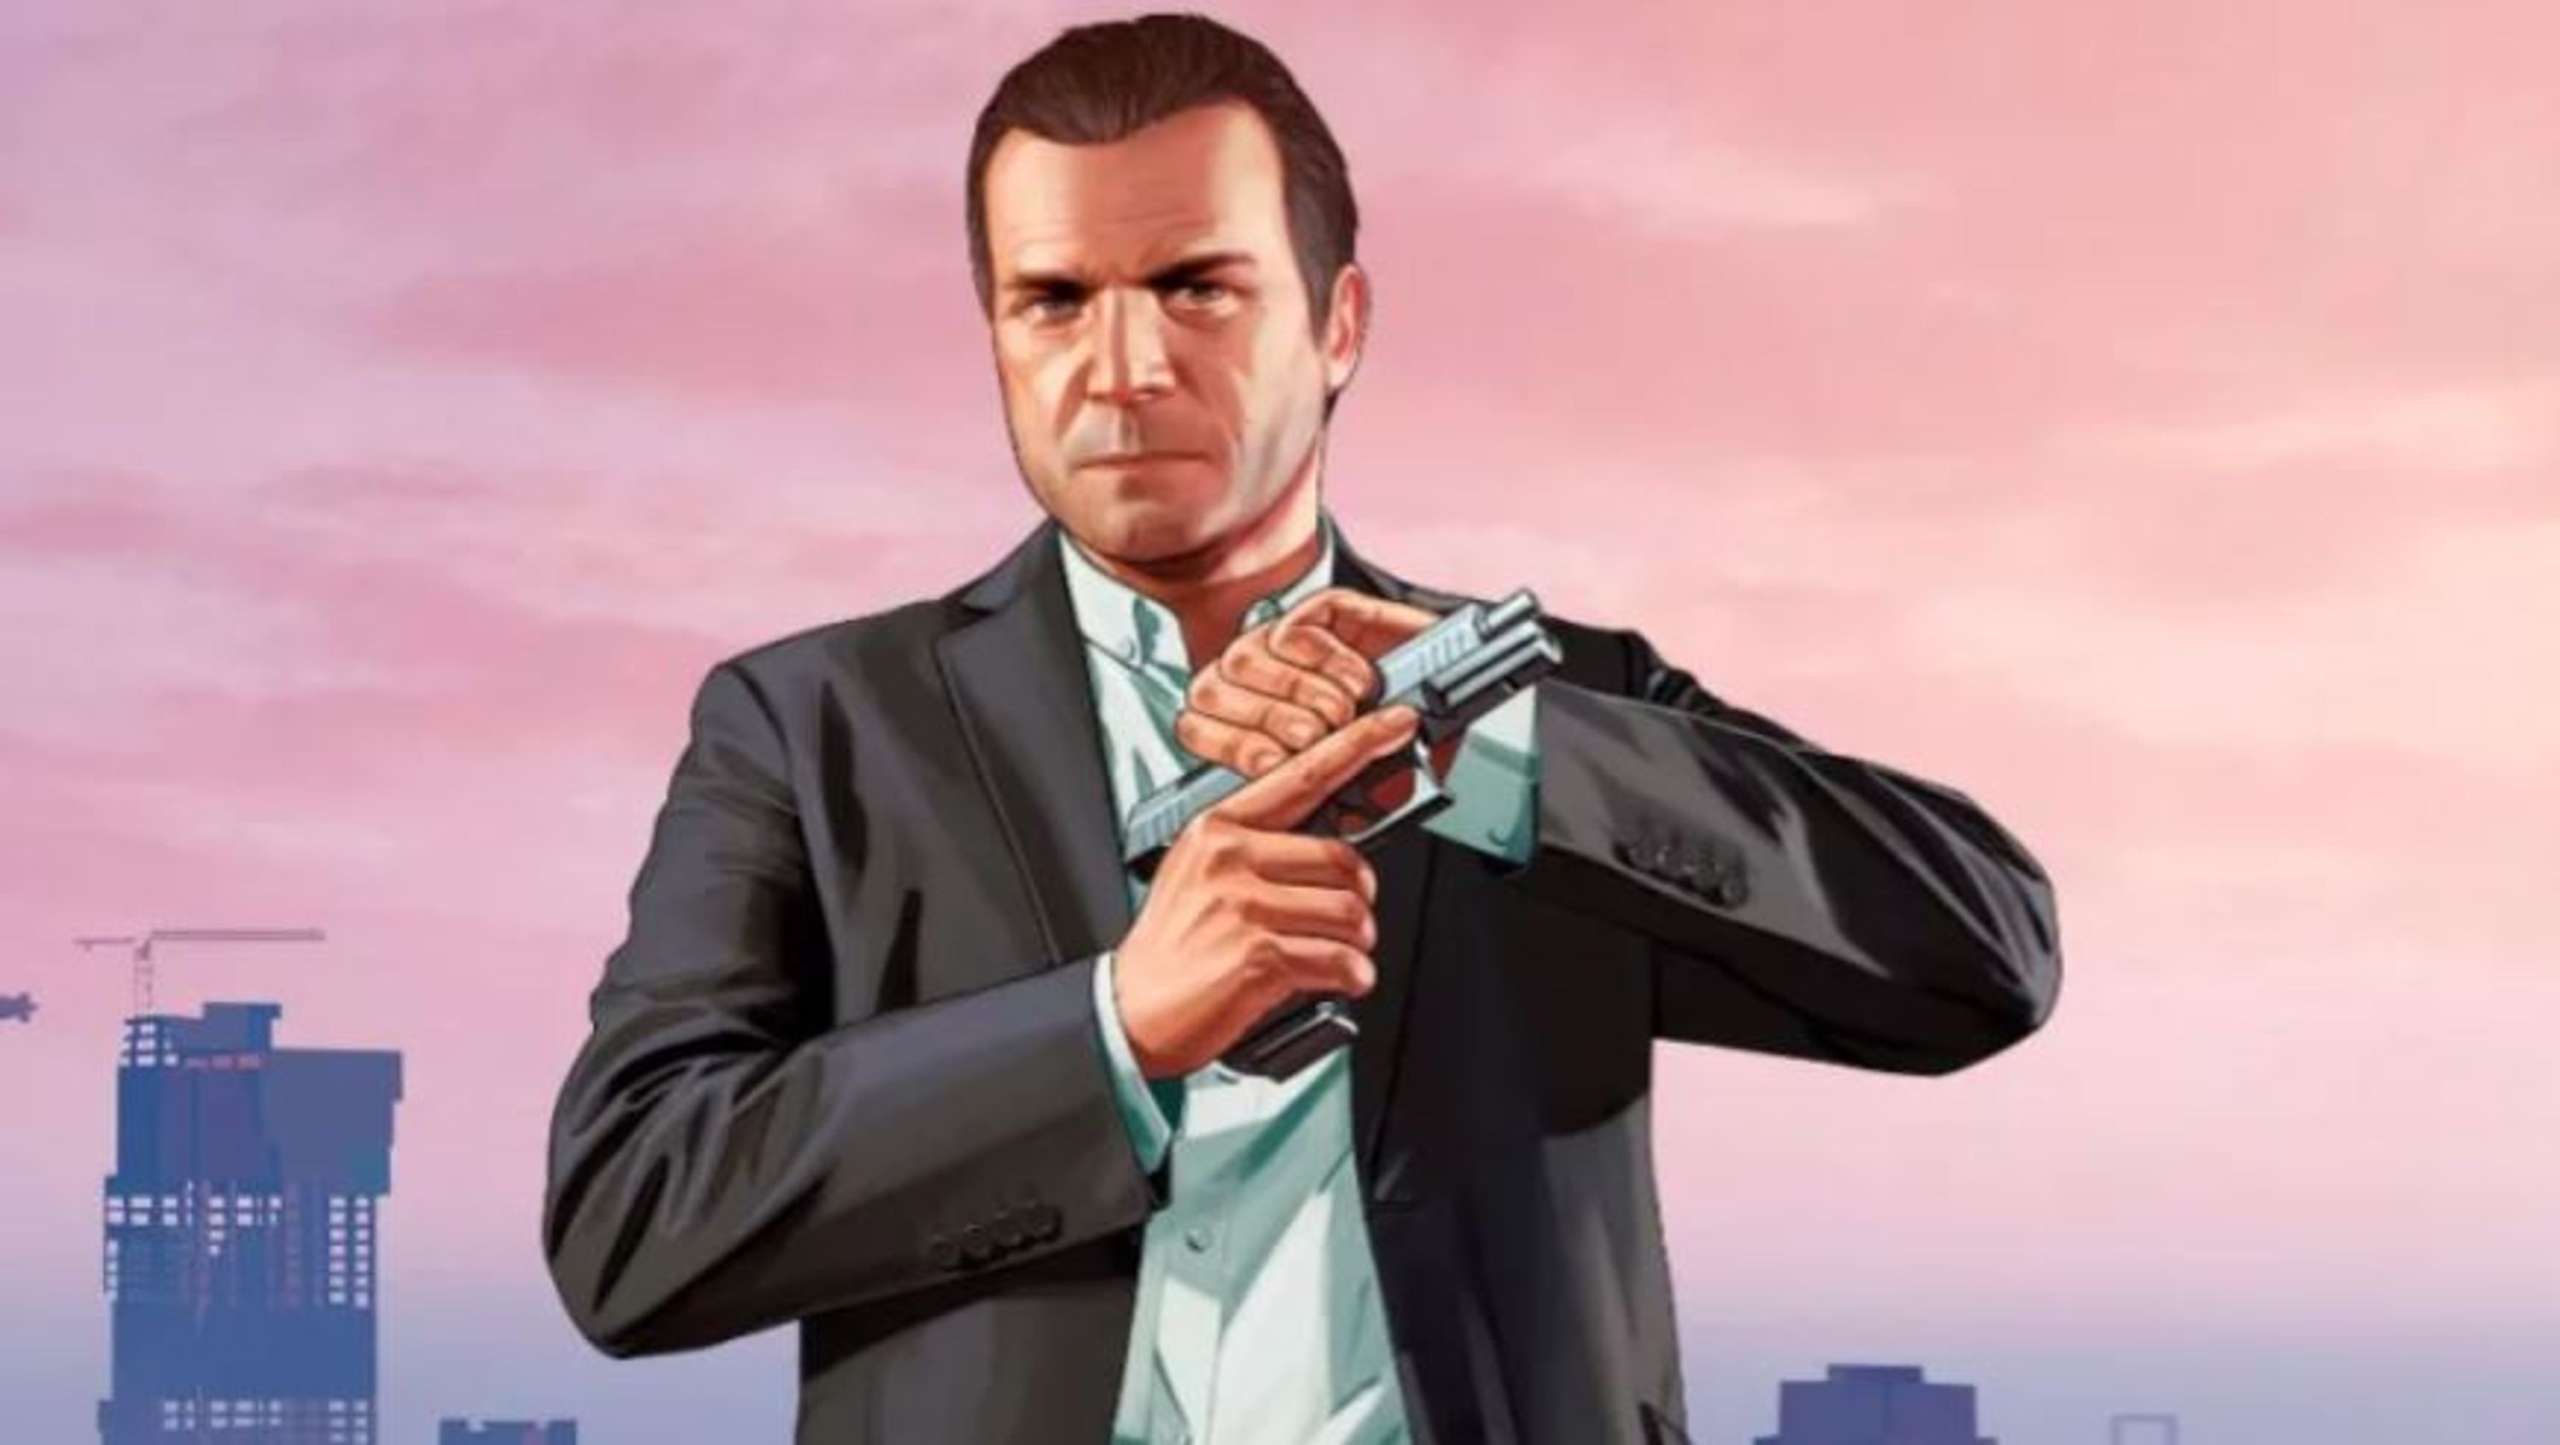 GTA 6 Grand Theft Auto Will Establish Creative Norms For The Game The Company And All Amusement According To Rockstar